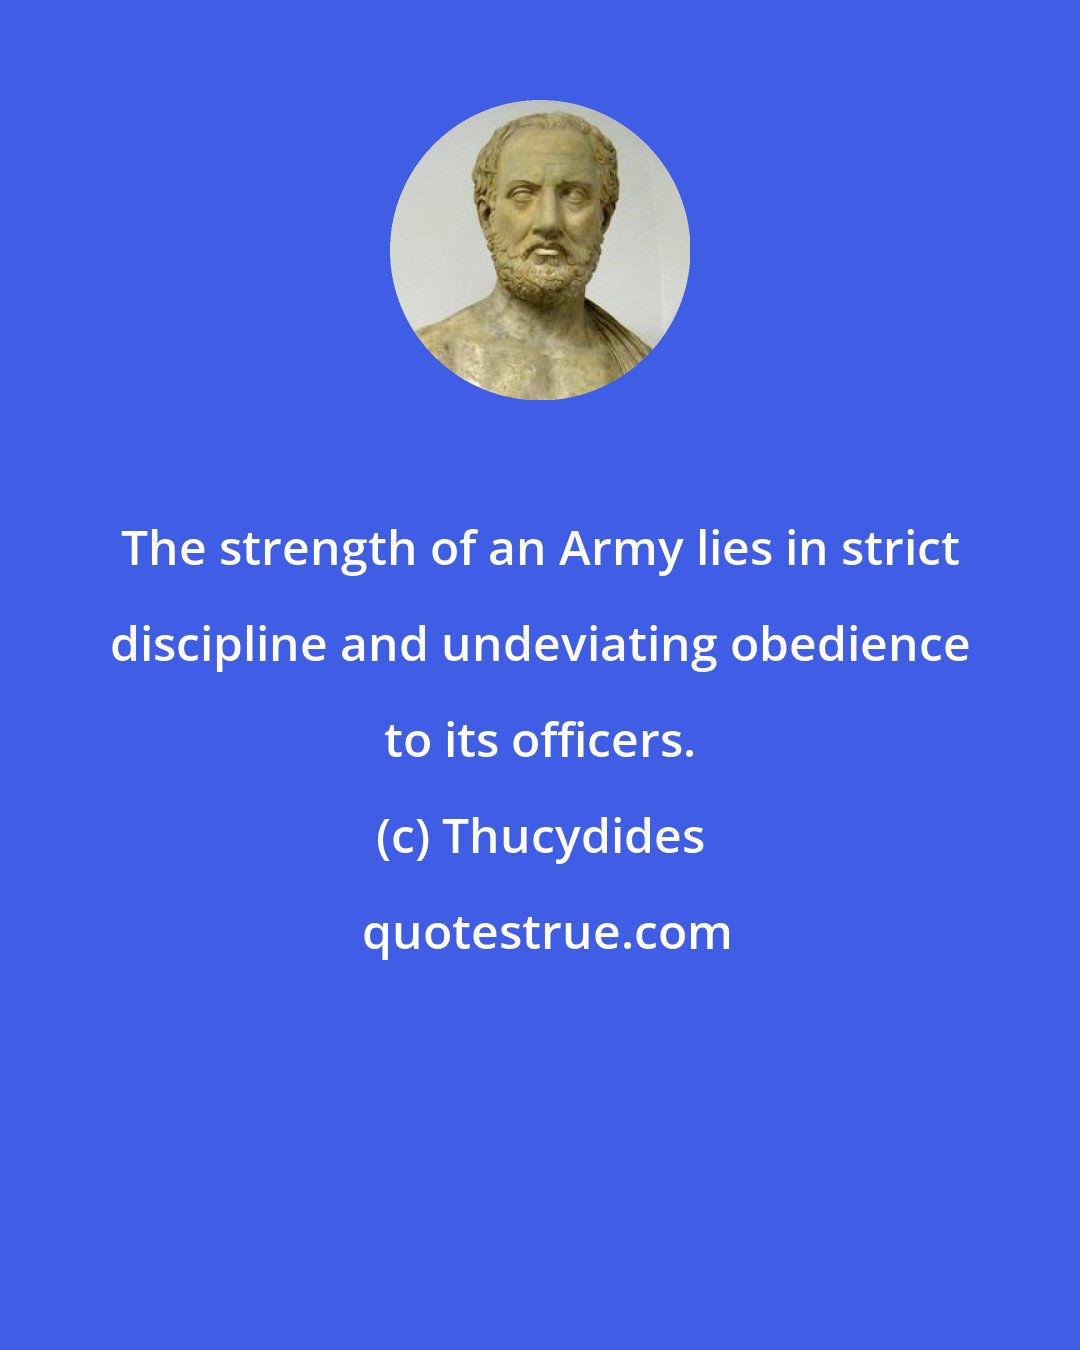 Thucydides: The strength of an Army lies in strict discipline and undeviating obedience to its officers.